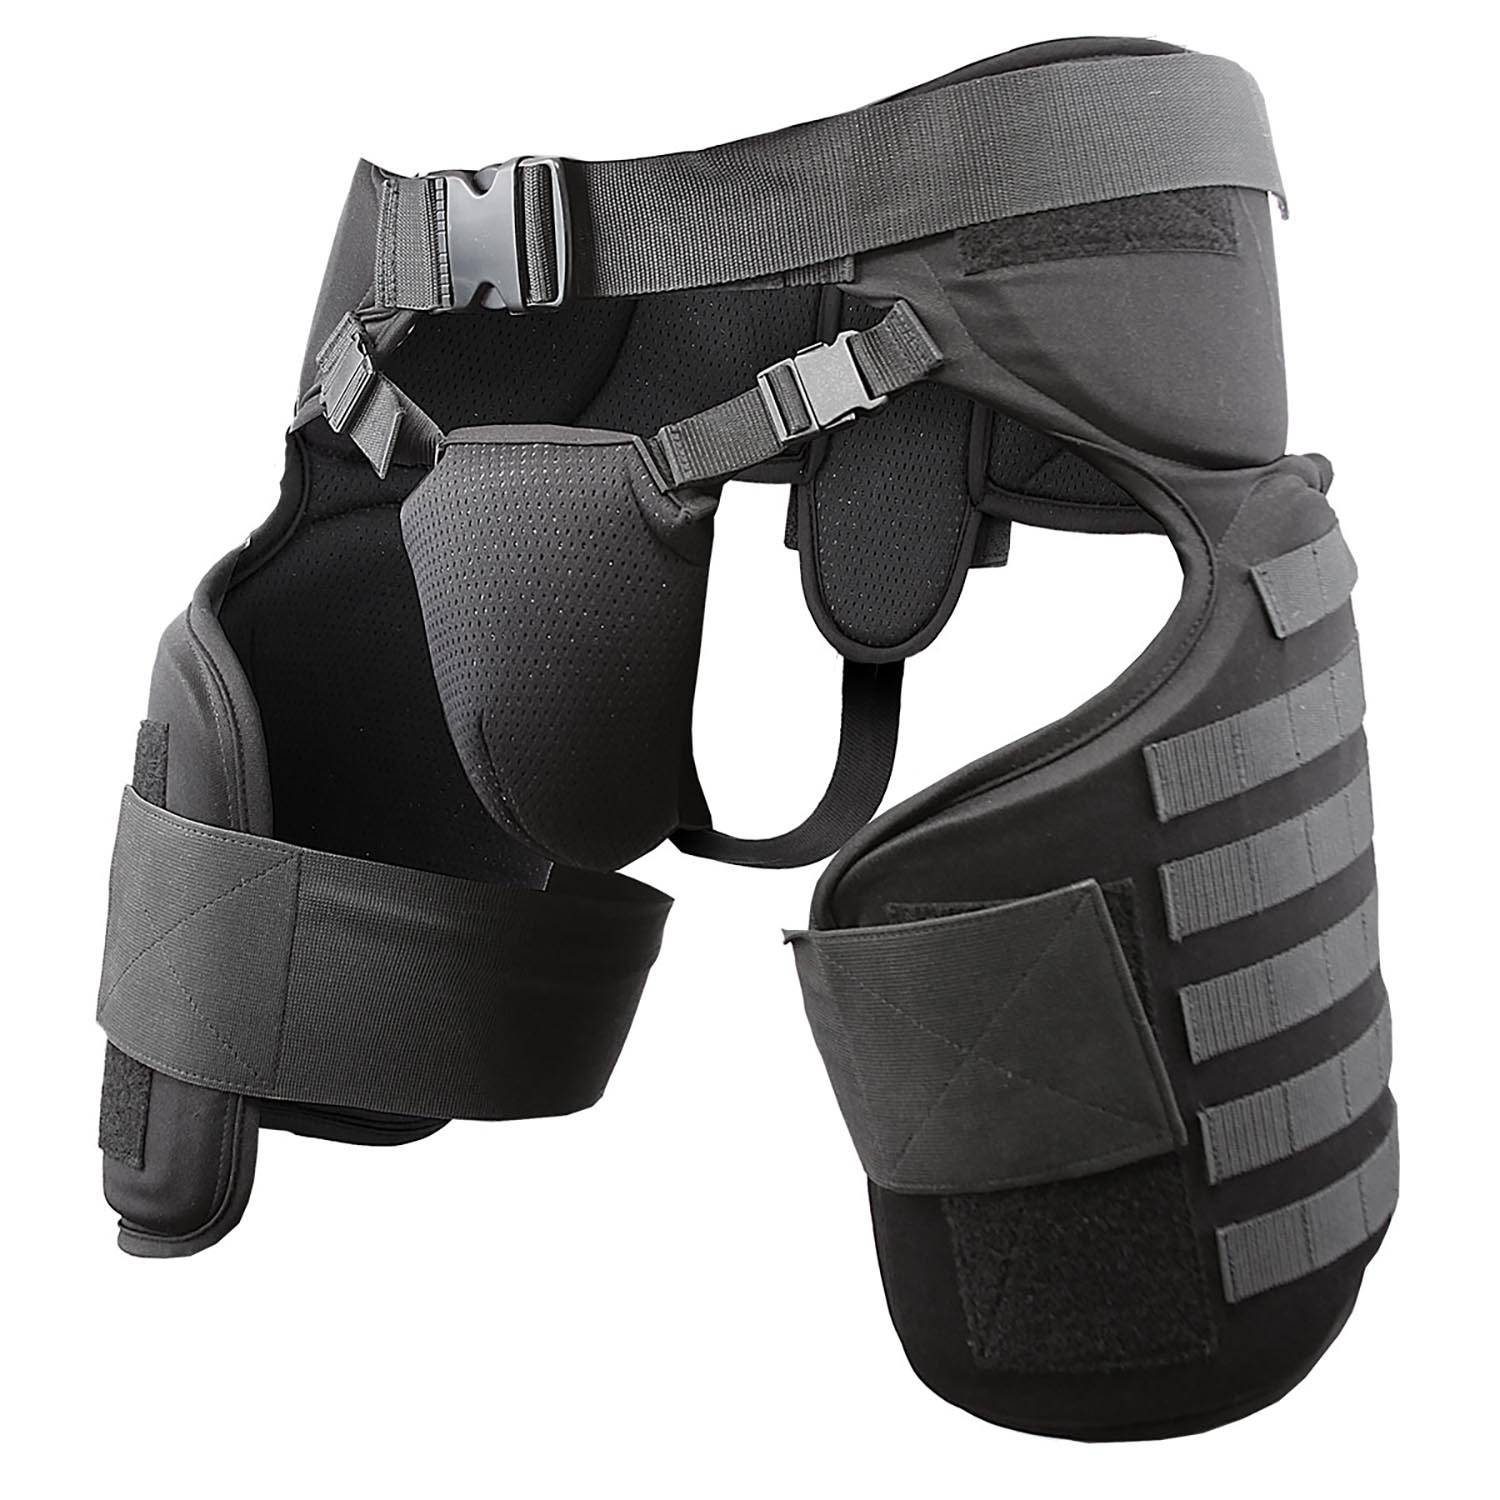 Imperial™ Neoprene Knee & Elbow Pads w/ Reinforced Caps - Damascus